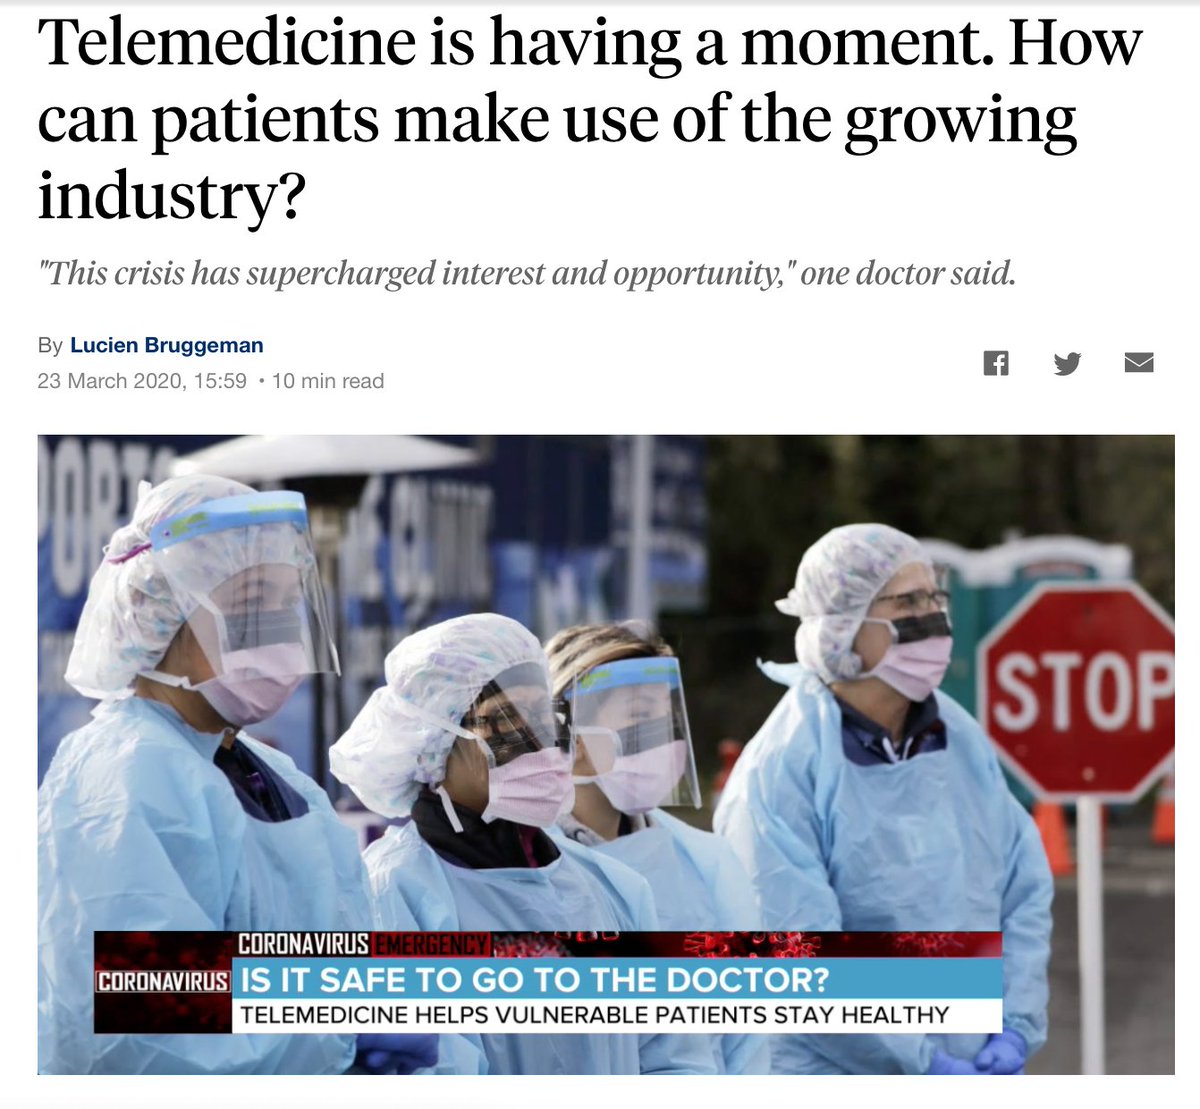 The COVID-19 pandemic has supercharged the interest in and opportunity for telehealth out of necessity. 

abcnews.go.com/Health/telemed…

#DocDoc #patientempowerment #patientintelligence #patientfirst #healthcare #health #healthtech #insurance #insurtech #insurers #startup